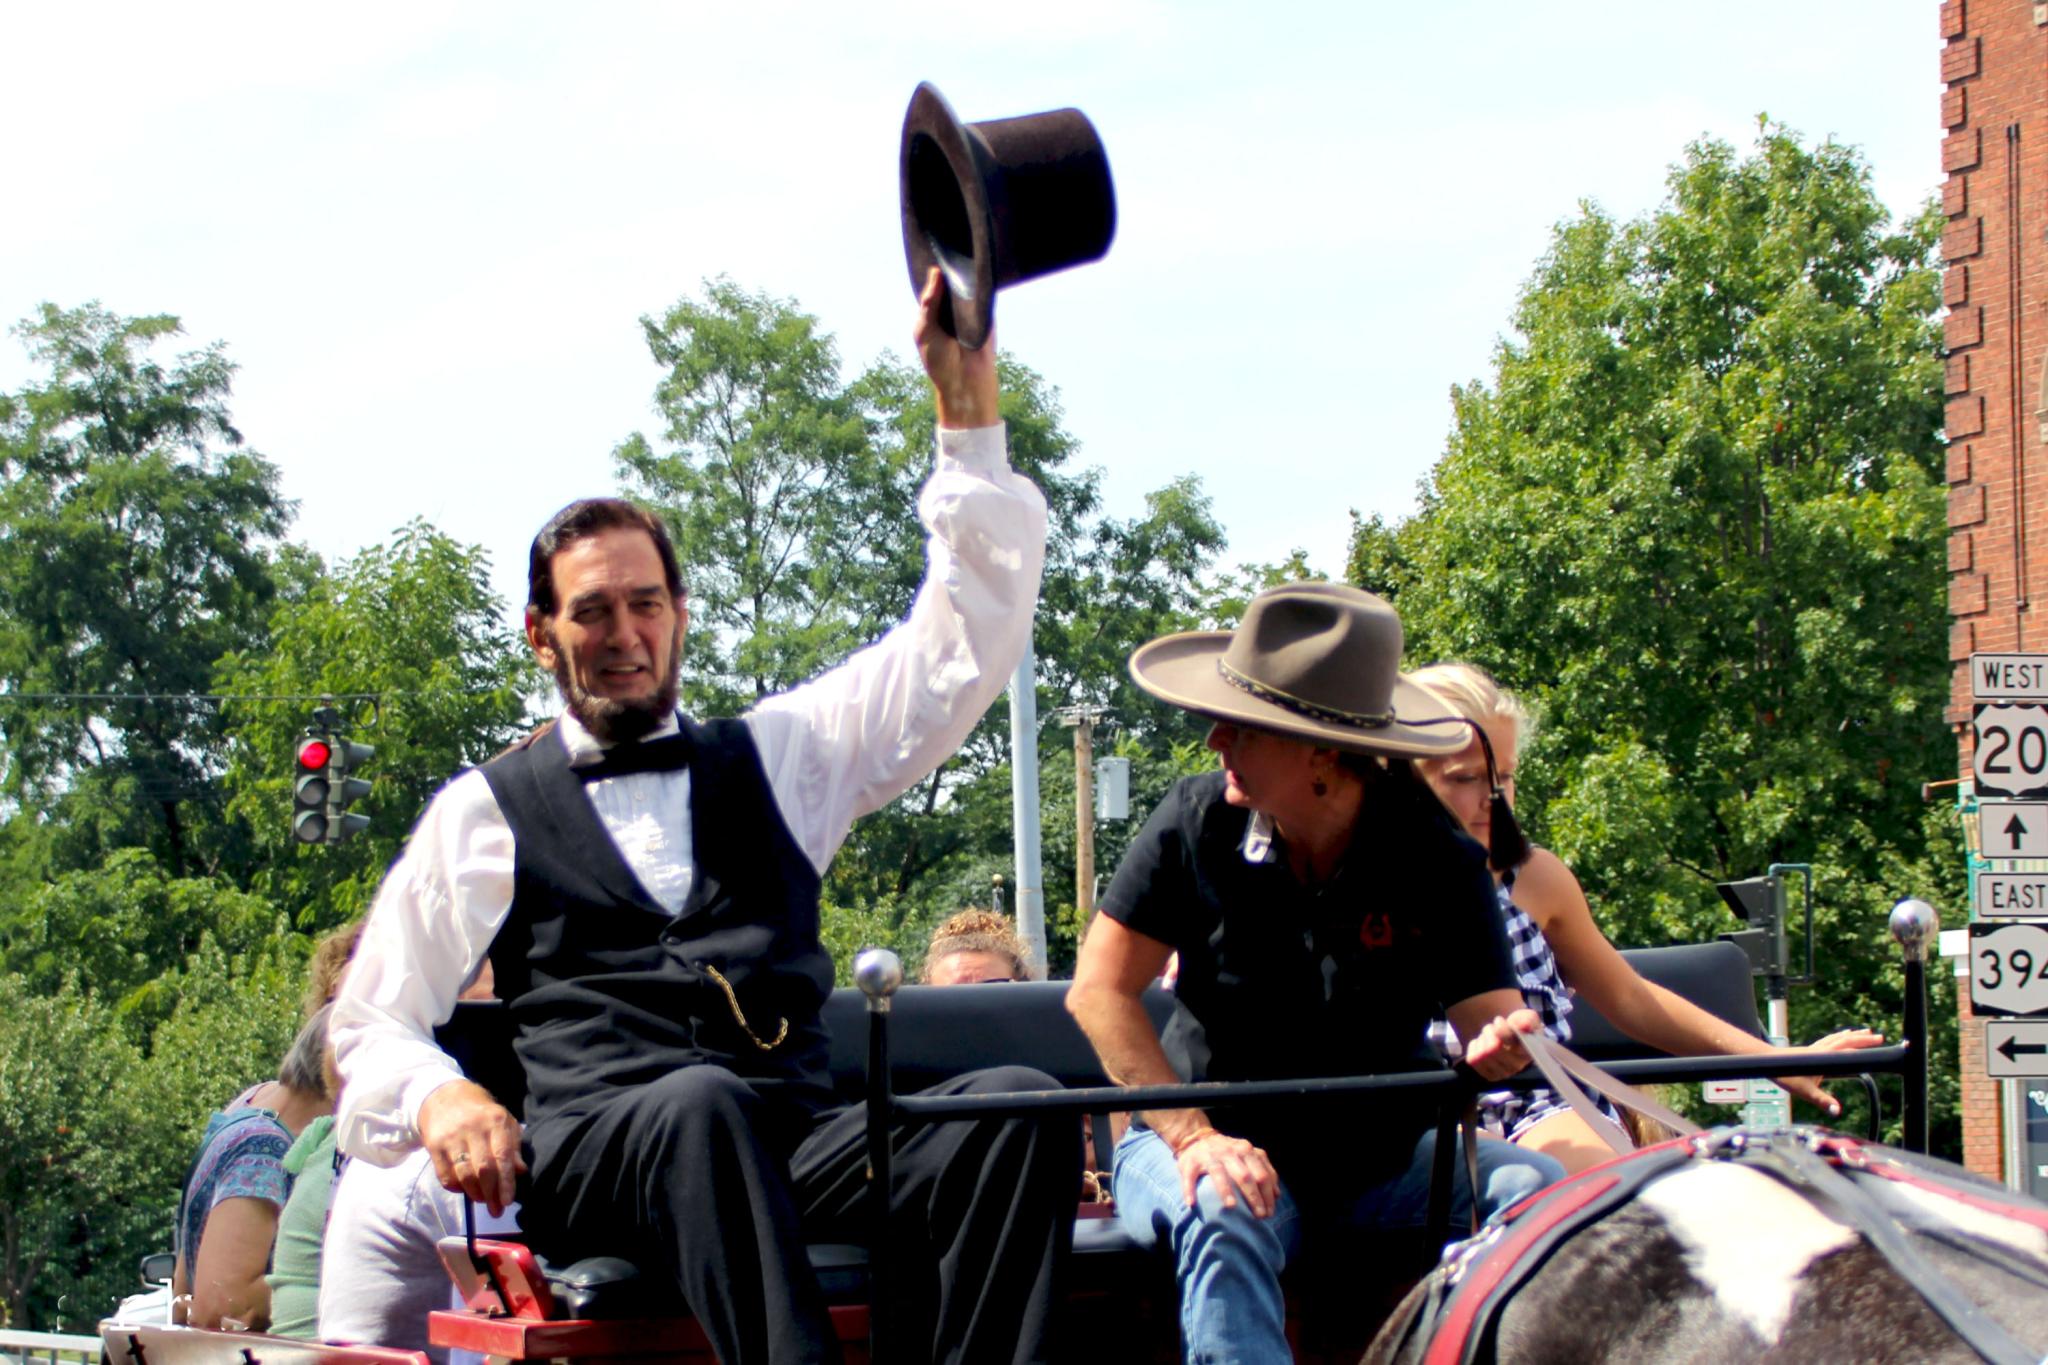 Abe Lincoln Riding on Carriage